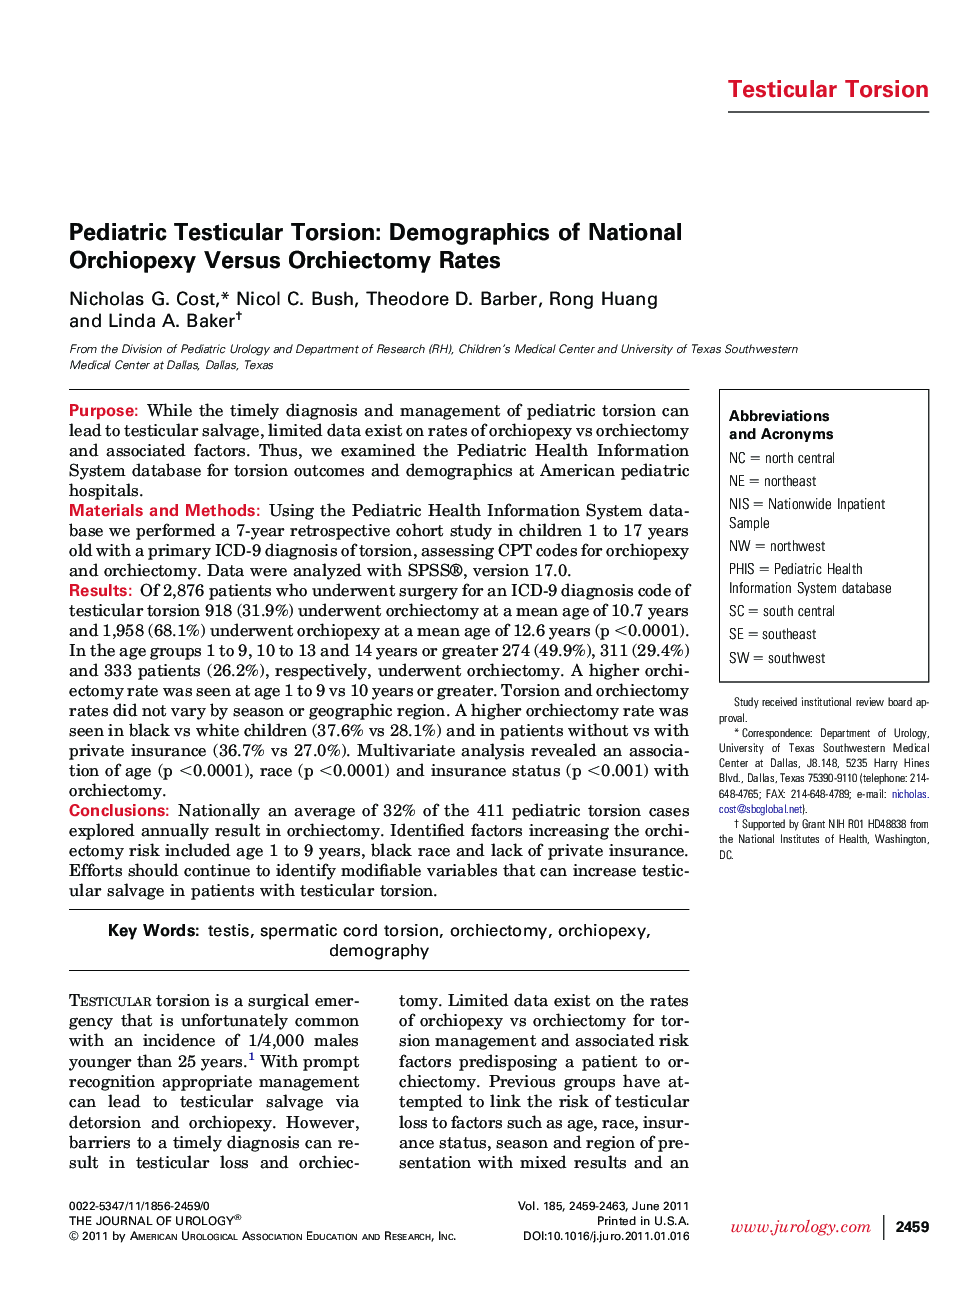 Pediatric Testicular Torsion: Demographics of National Orchiopexy Versus Orchiectomy Rates 